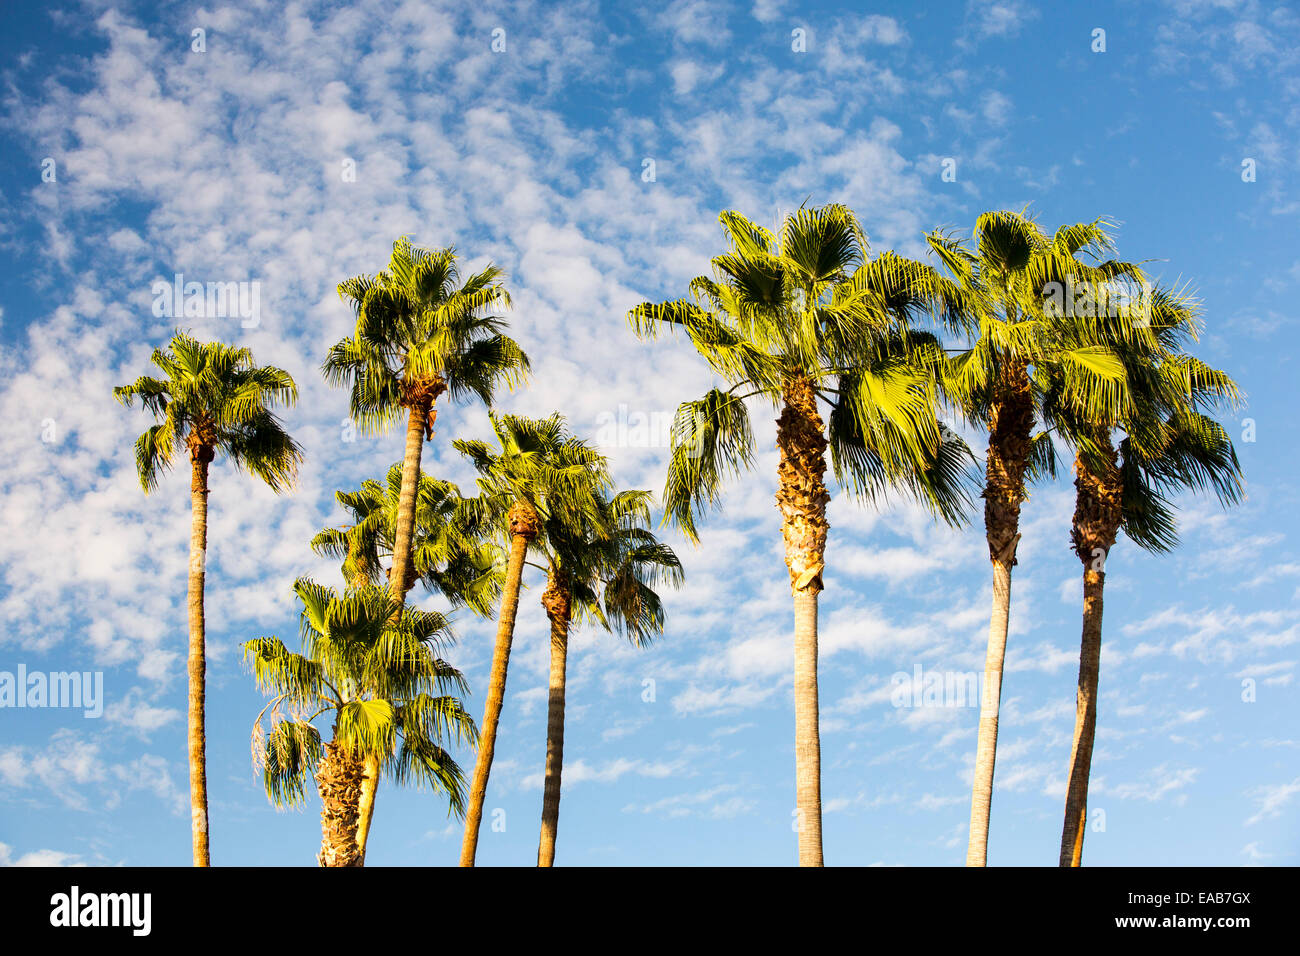 Palm trees at sunset in Bakersfield, California, USA. Stock Photo